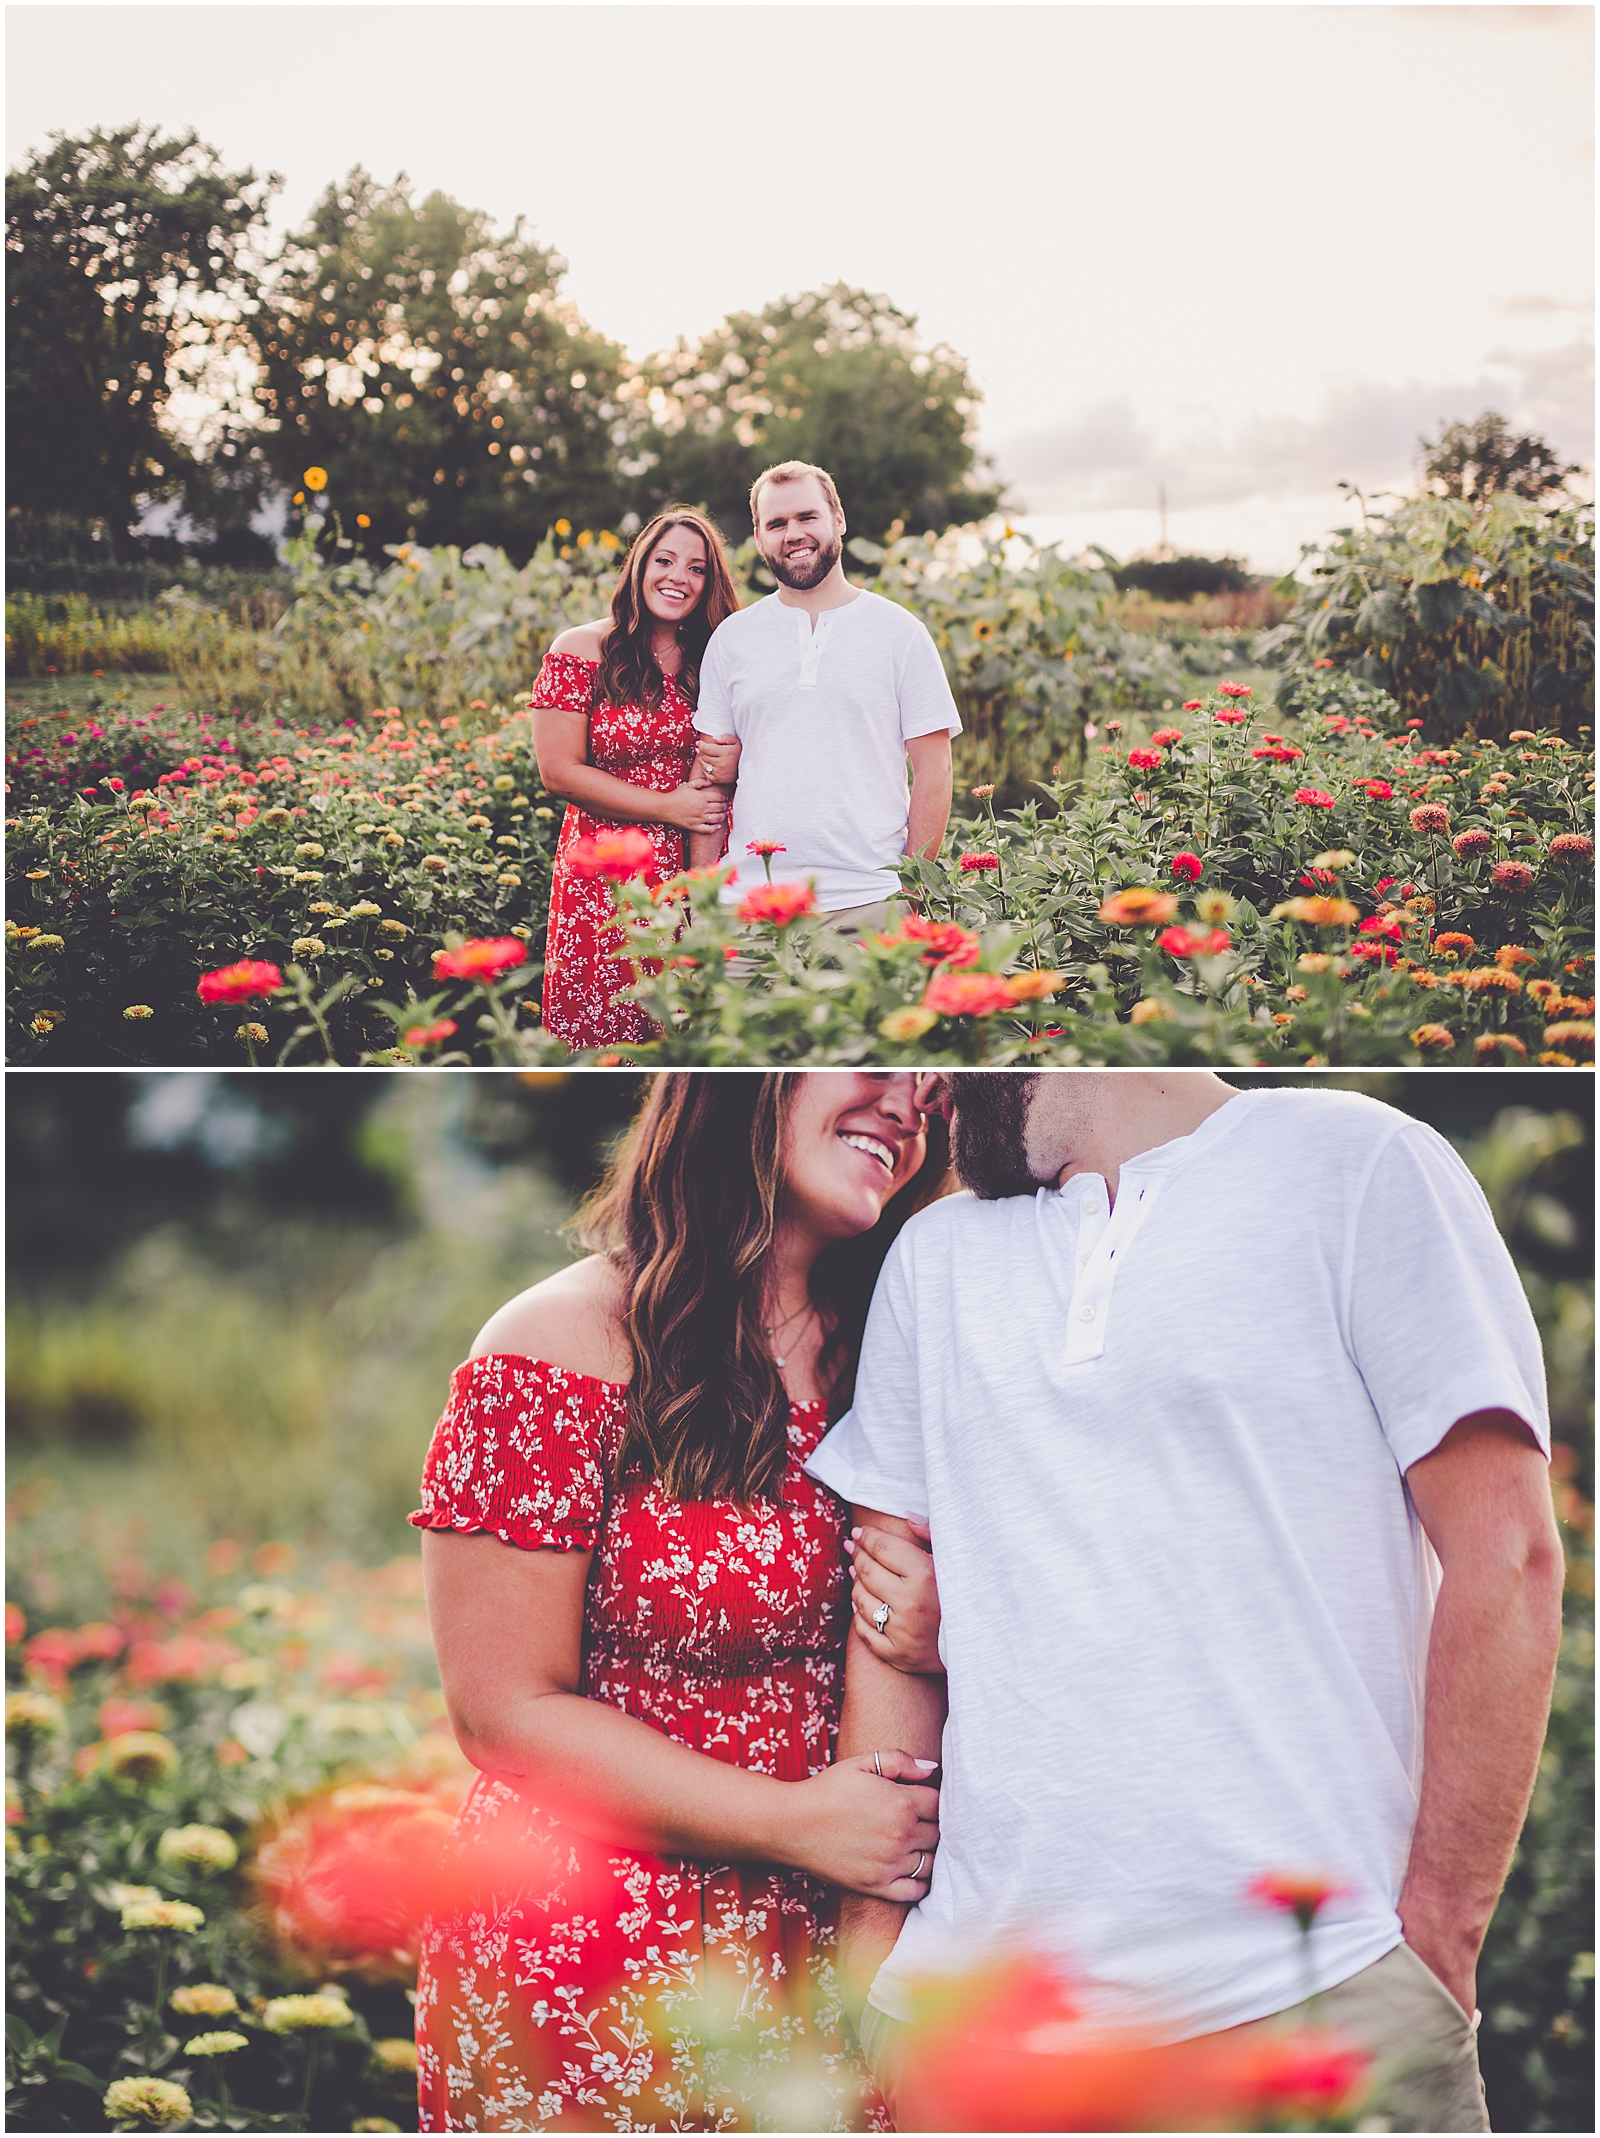 Daniela and Andrew's sunflower engagement photos at Proclamation Flowers with Chicagoland wedding photographer Kara Evans Photographer.